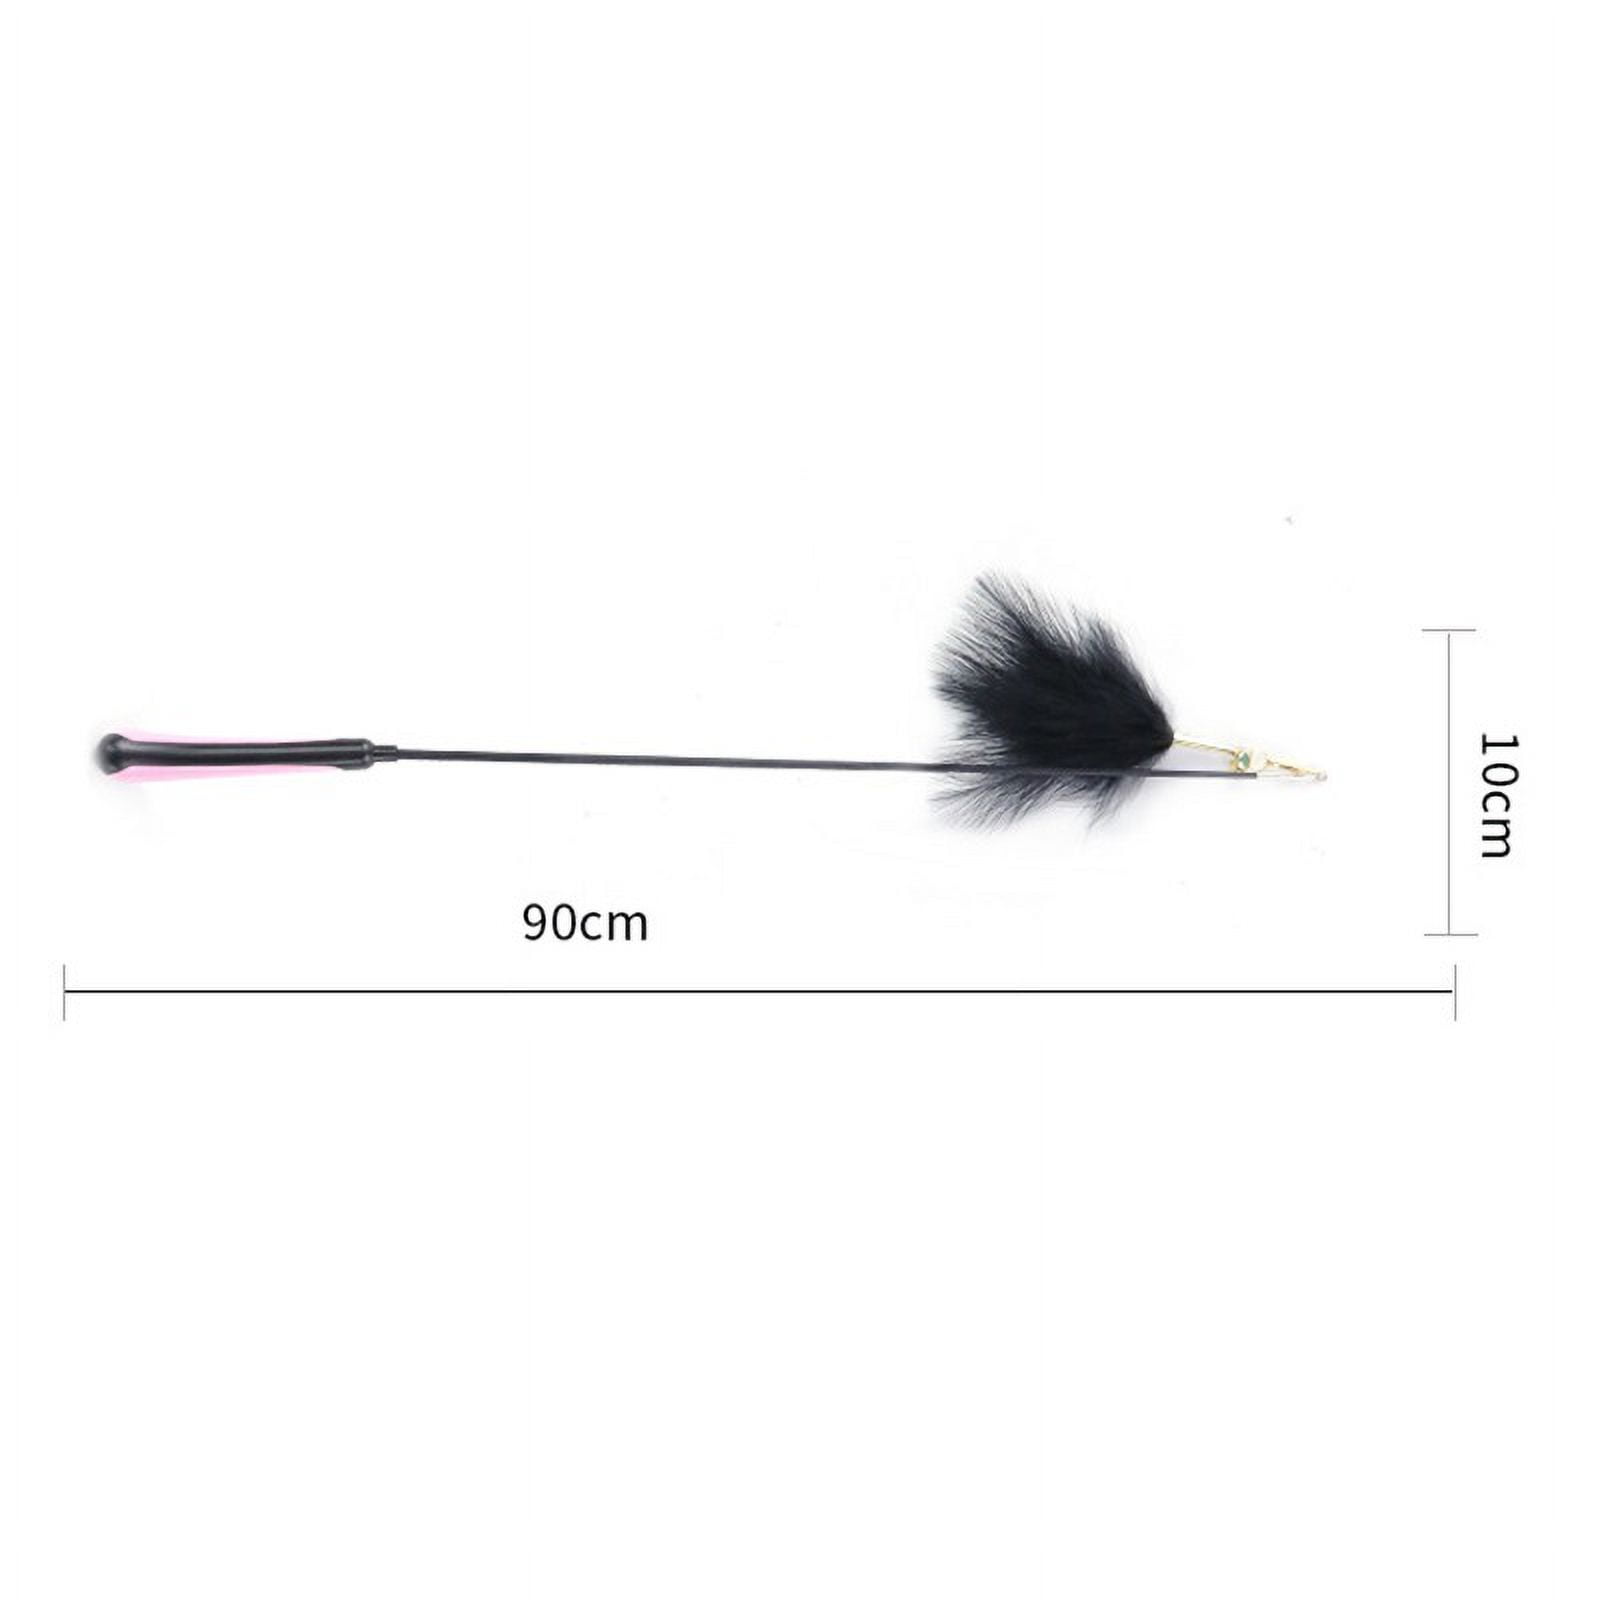 Bigstone Pet Cats Kitten Suction Cup Feather Spring Ball Teaser Tumbler  Interactive Toy